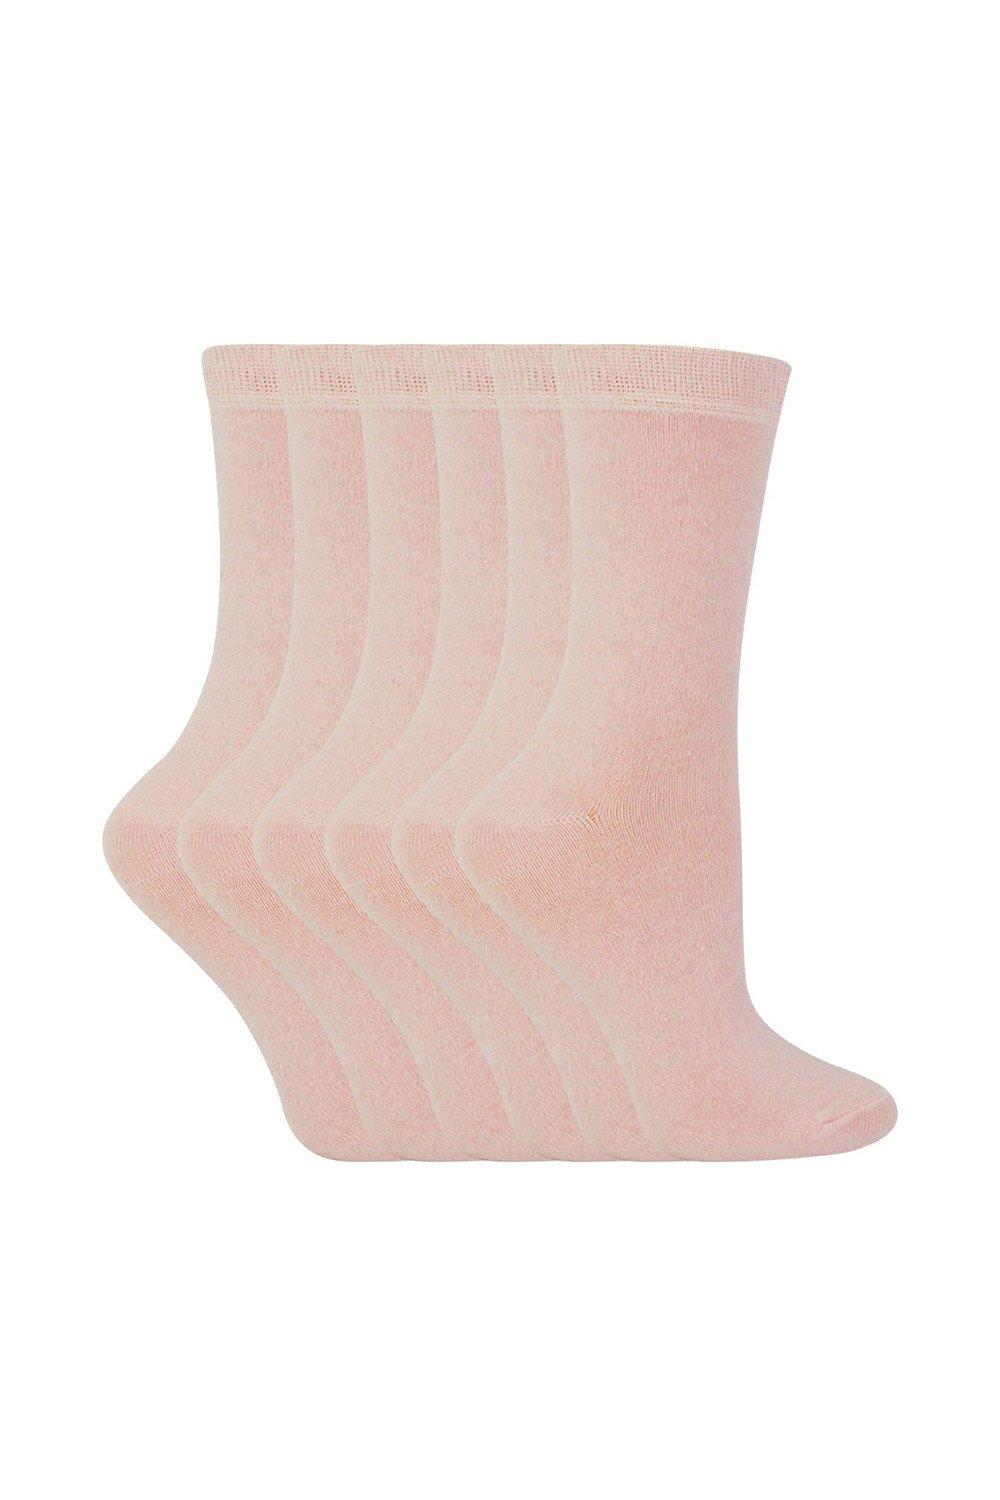 6 Pairs Solid Colour Casual Cotton Dress Socks